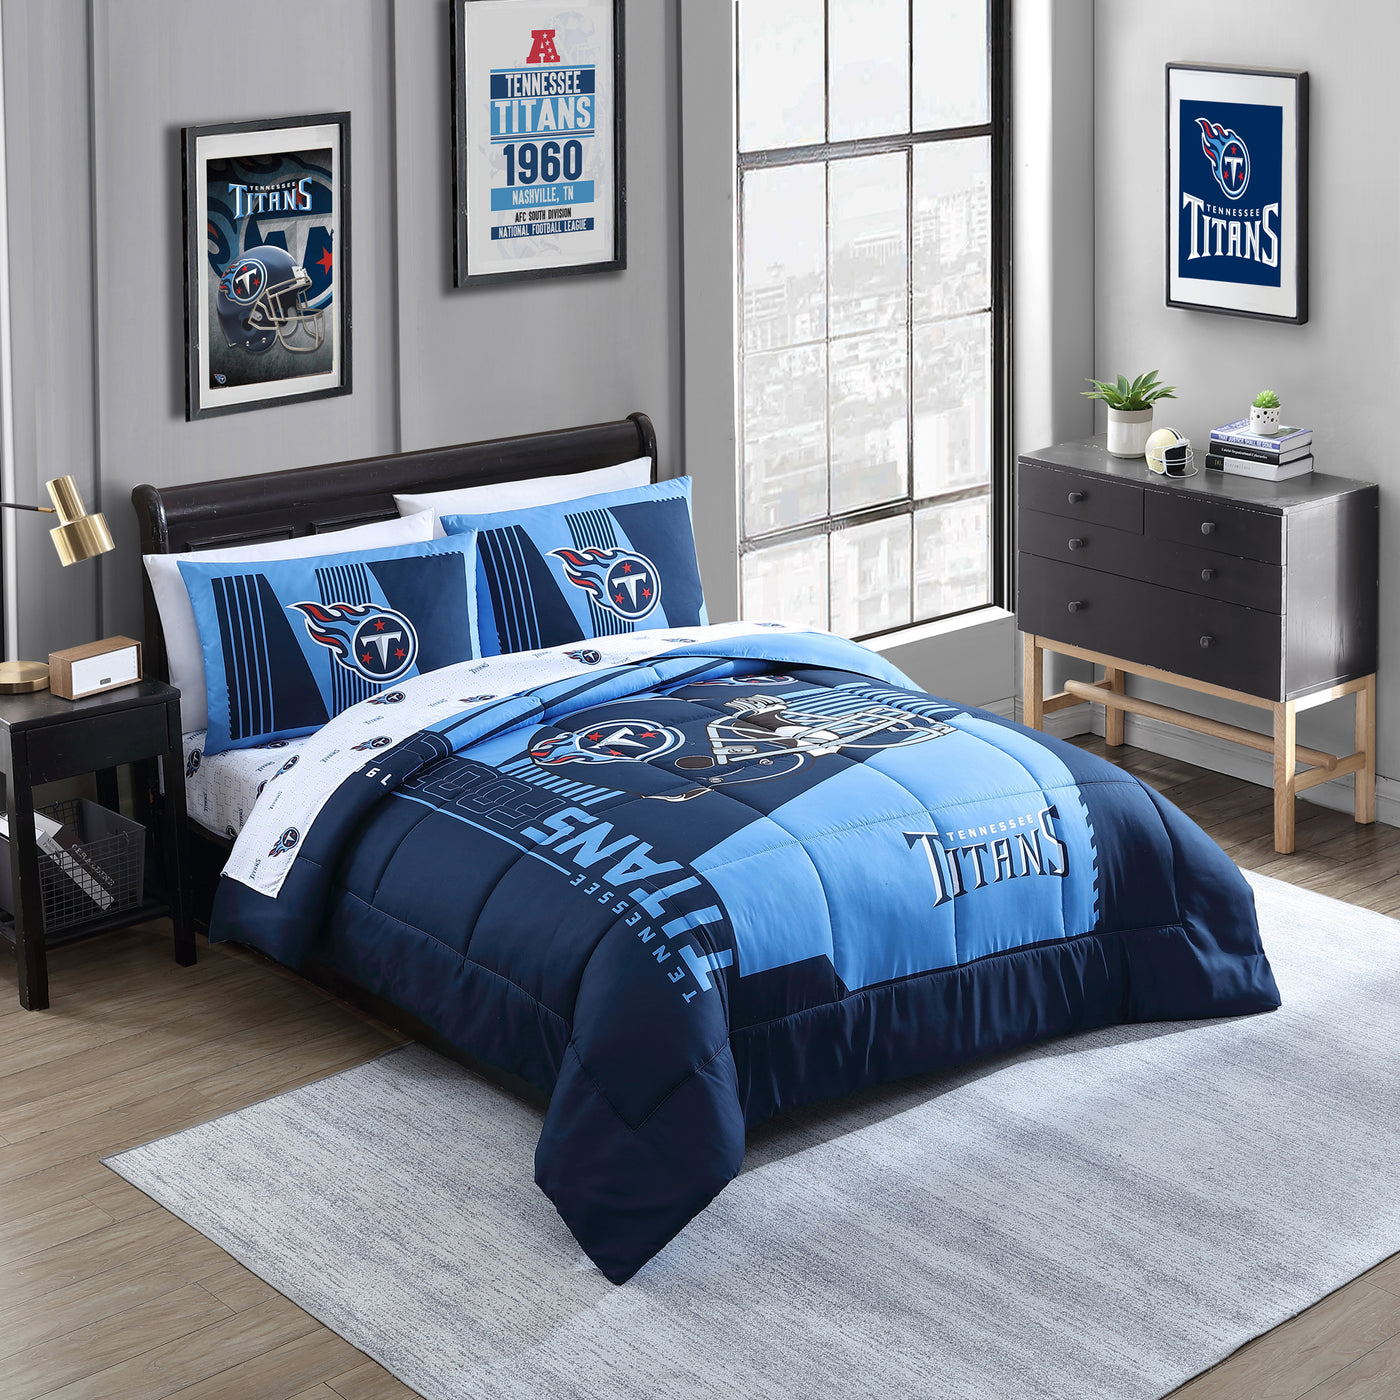 Tennessee Titans Status Bed In A Bag Queen